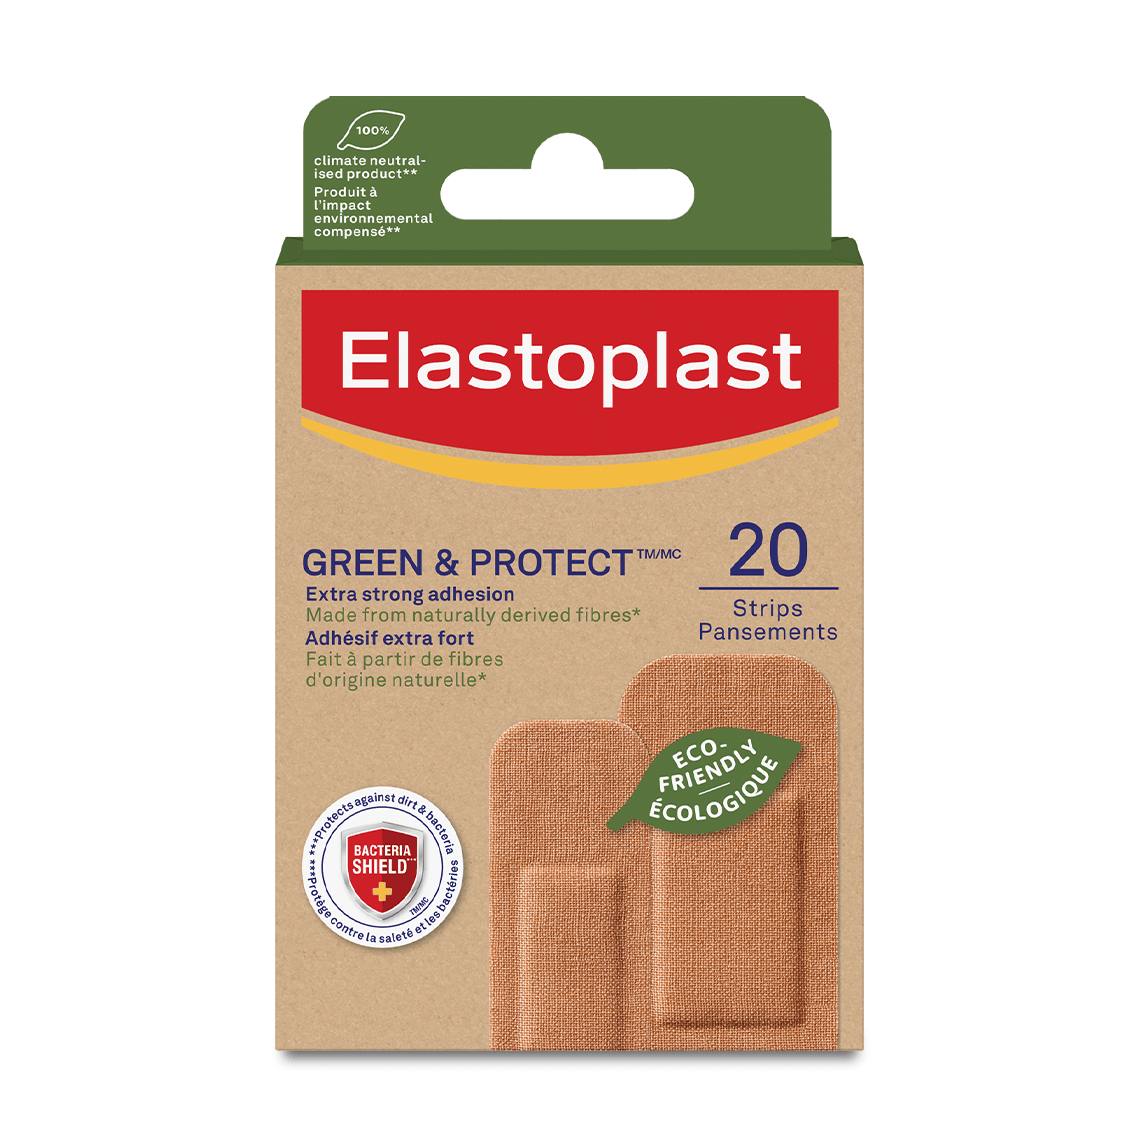 Green & Protect Eco-Friendly Bandage Strips